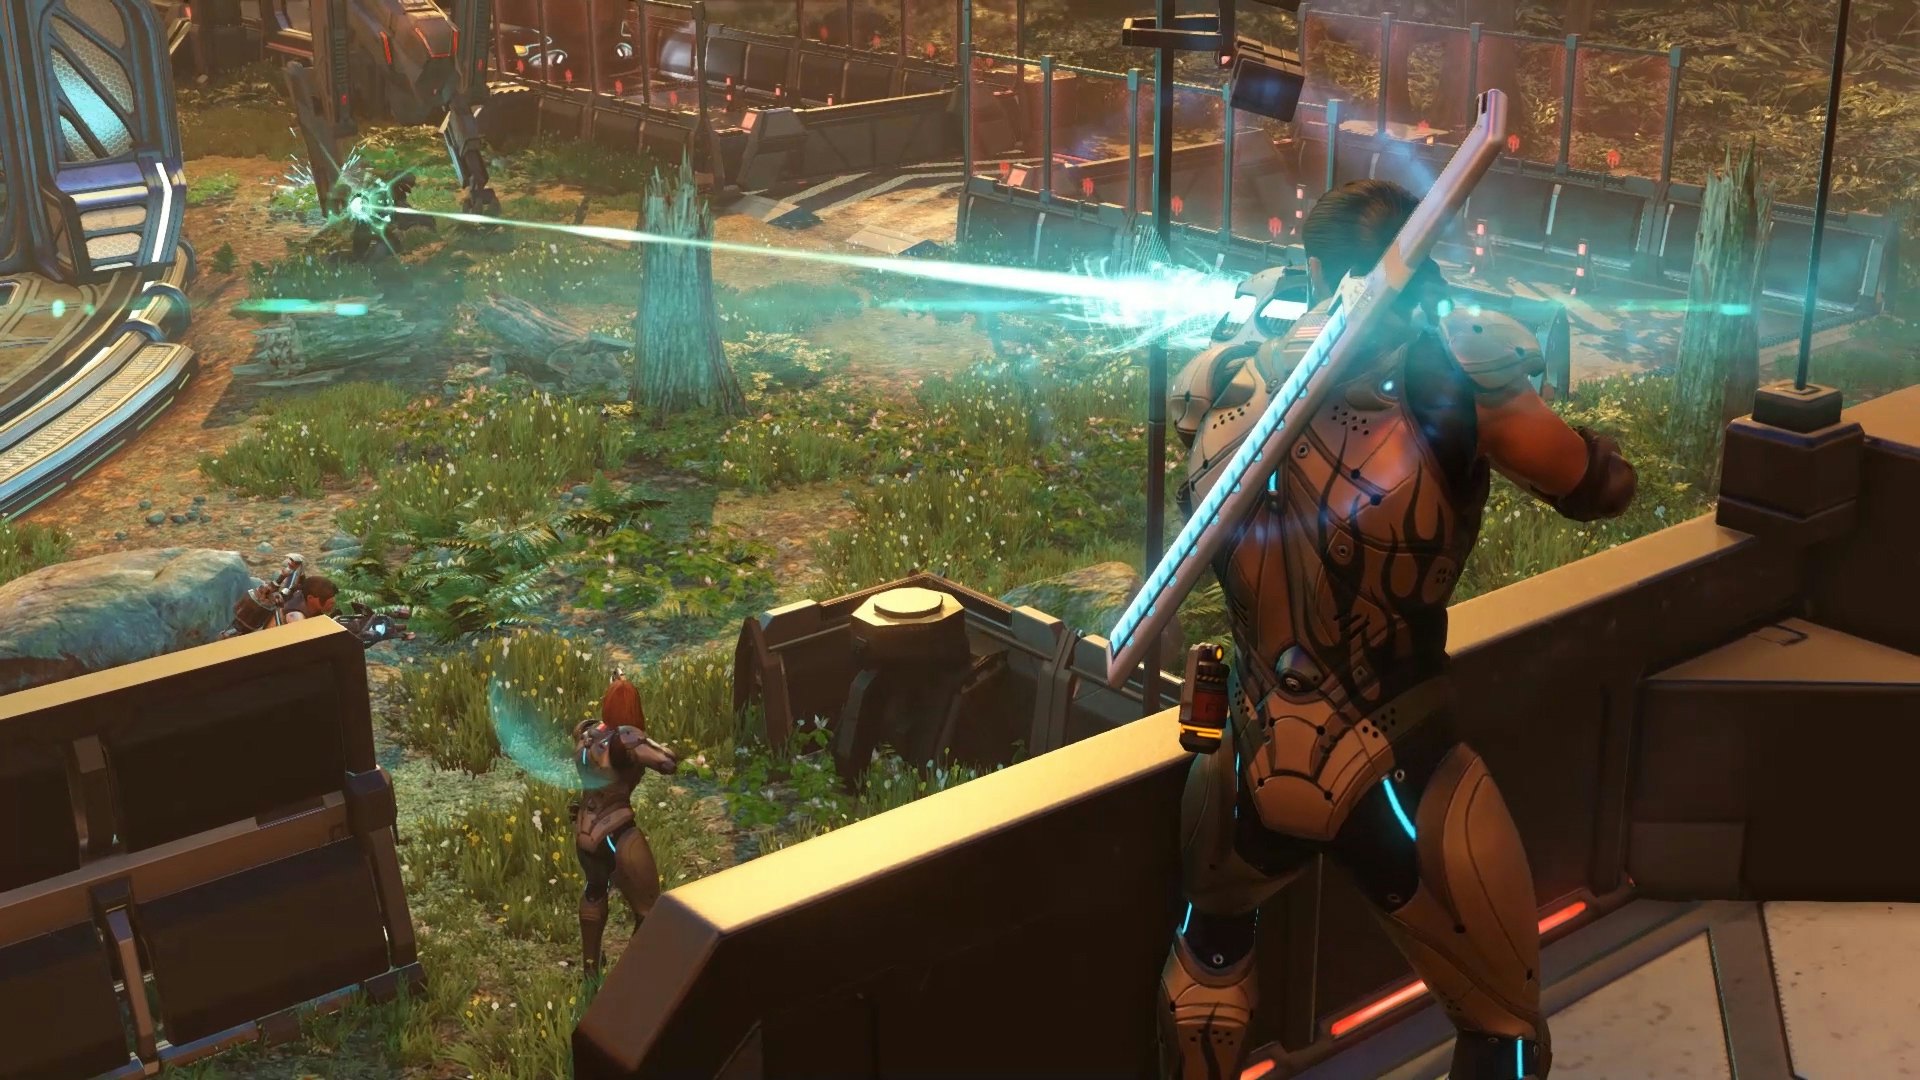 18 Tips to Beat 'XCOM 2' and Stop the Avatar Project